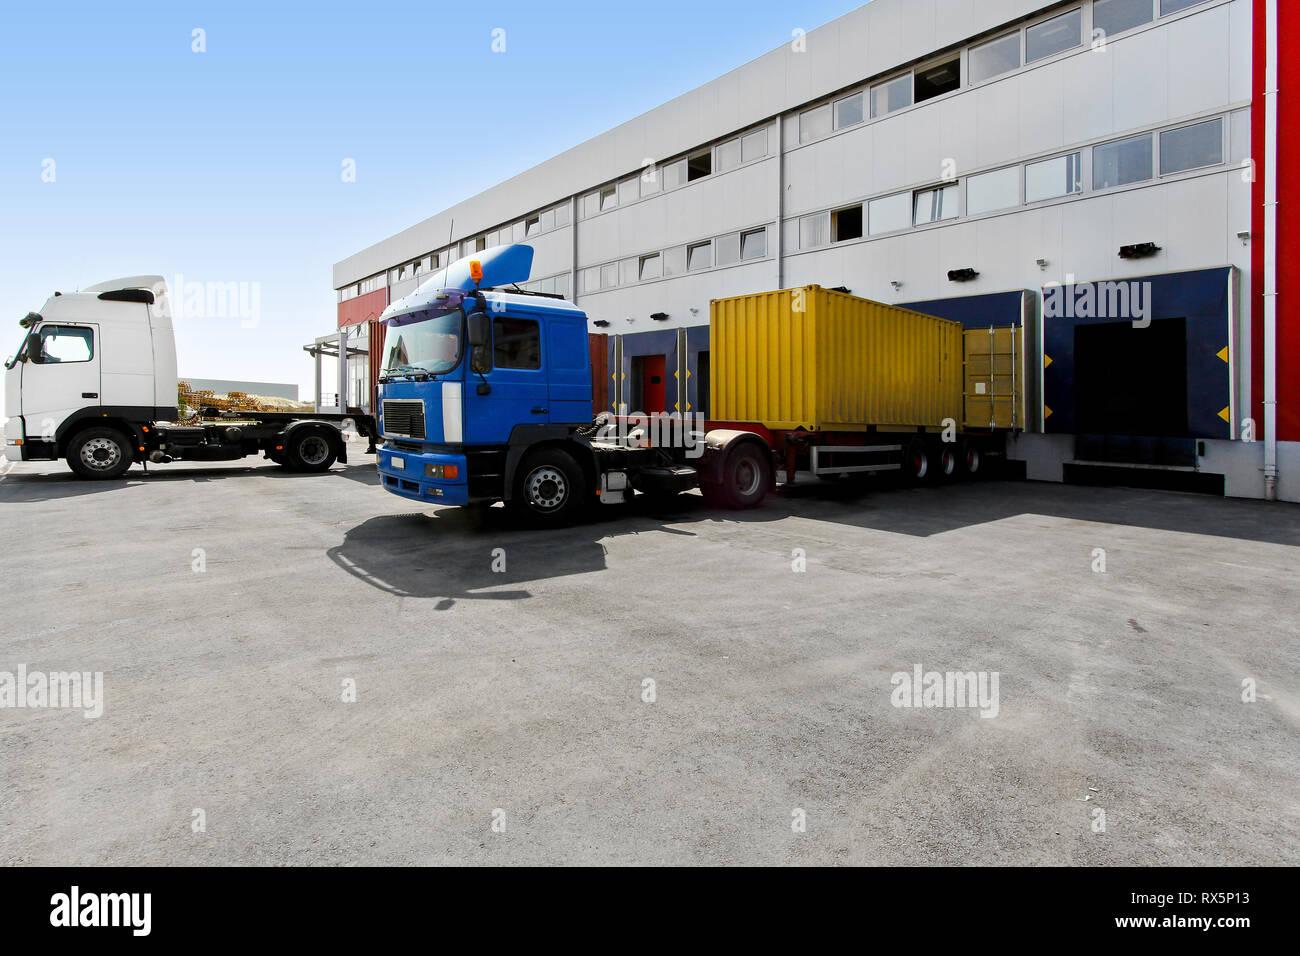 Unloading big container trucks at warehouse building Stock Photo